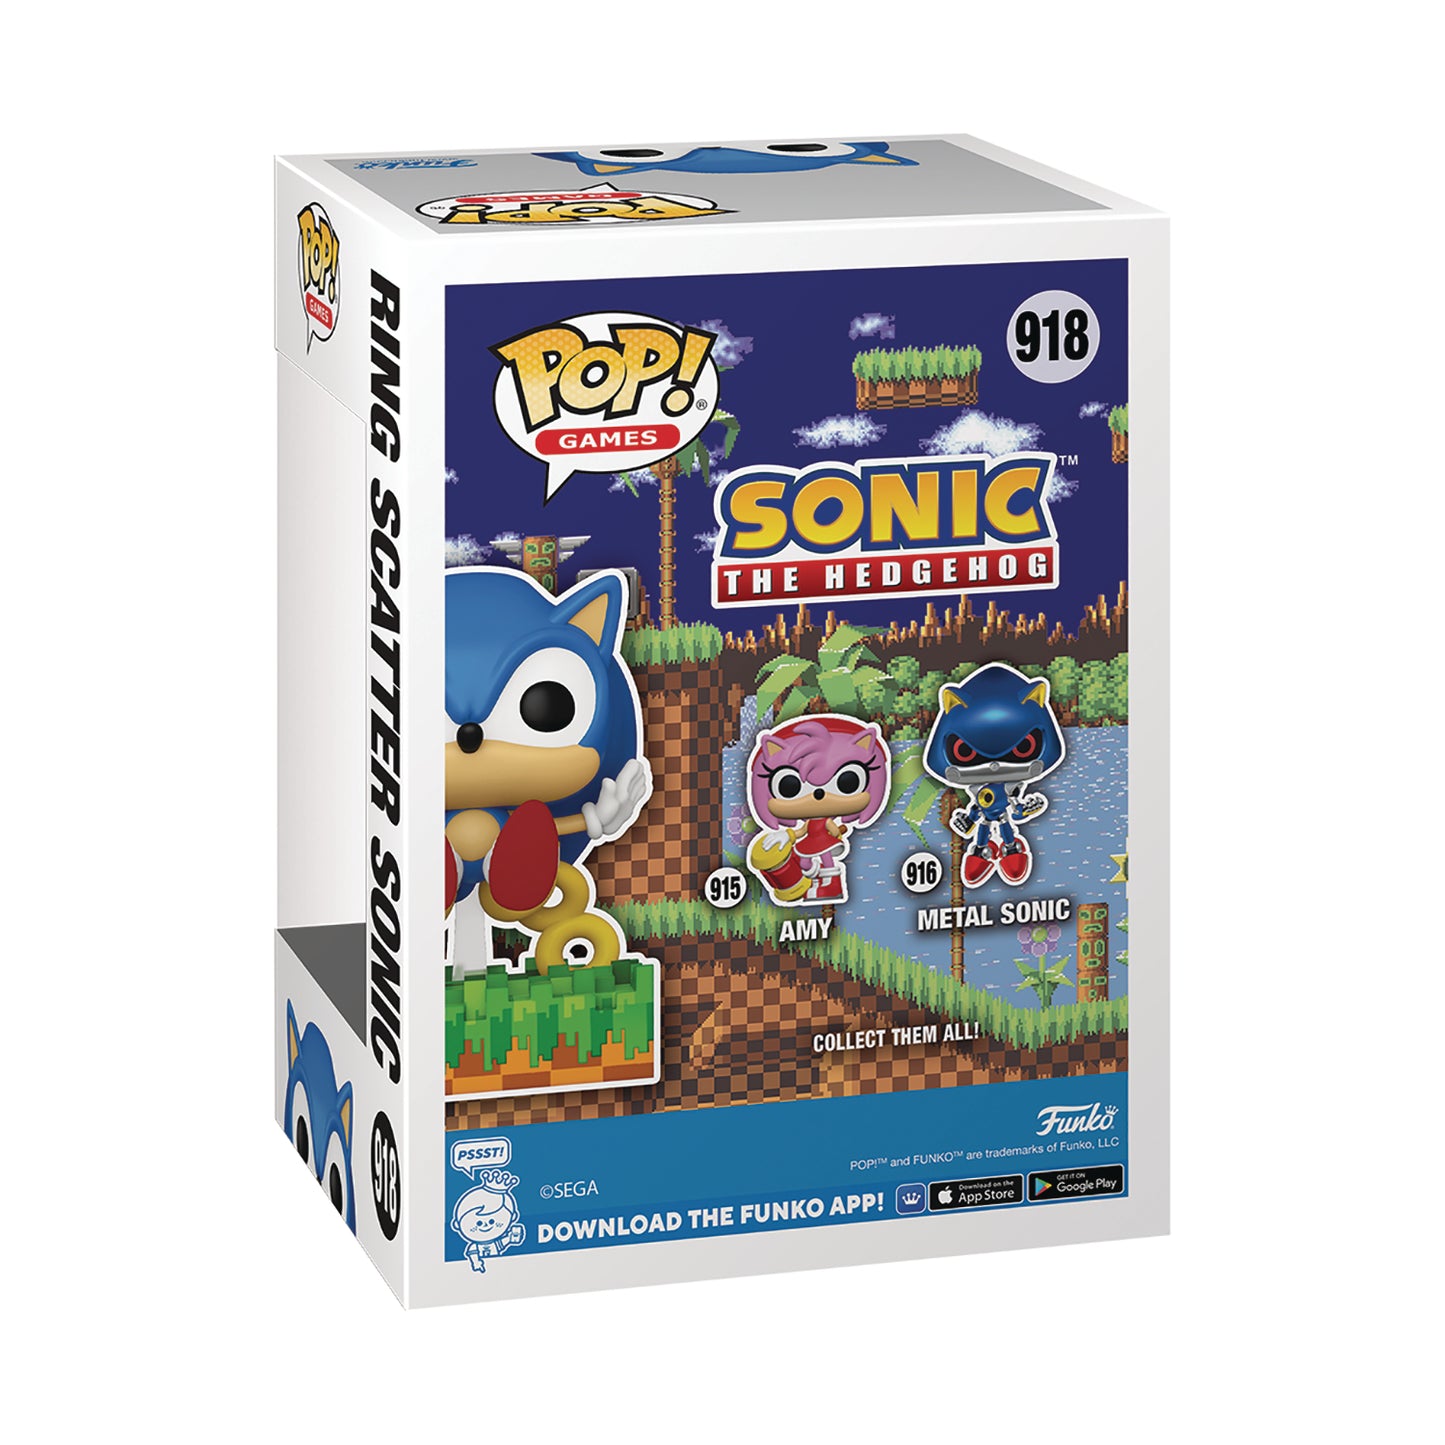 (PRE-ORDER) Funko POP! Games: Sonic the Hedgehog - Sonic (Ring Scatter) - Previews Exclusive